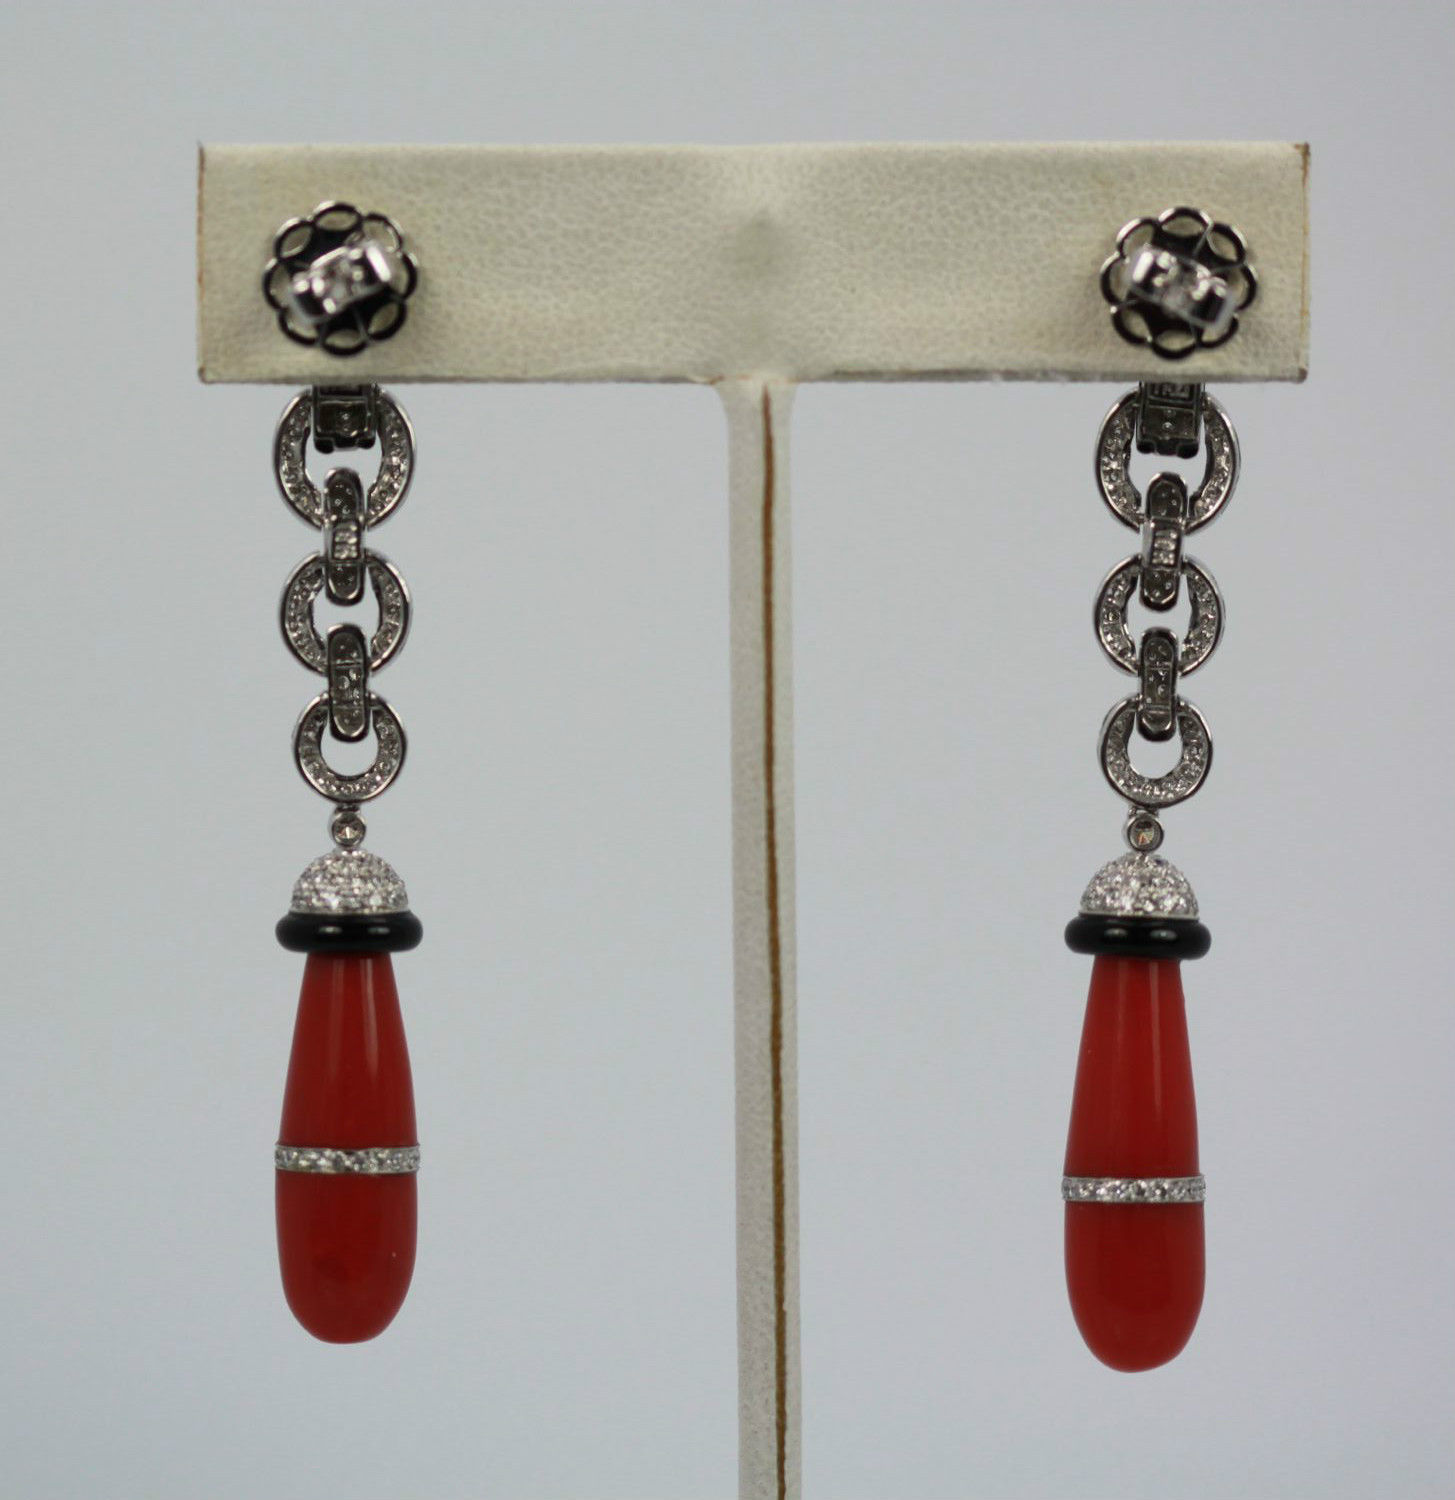 Eli Frei 18K White Gold, Coral & Onyx Drop Earrings on stand